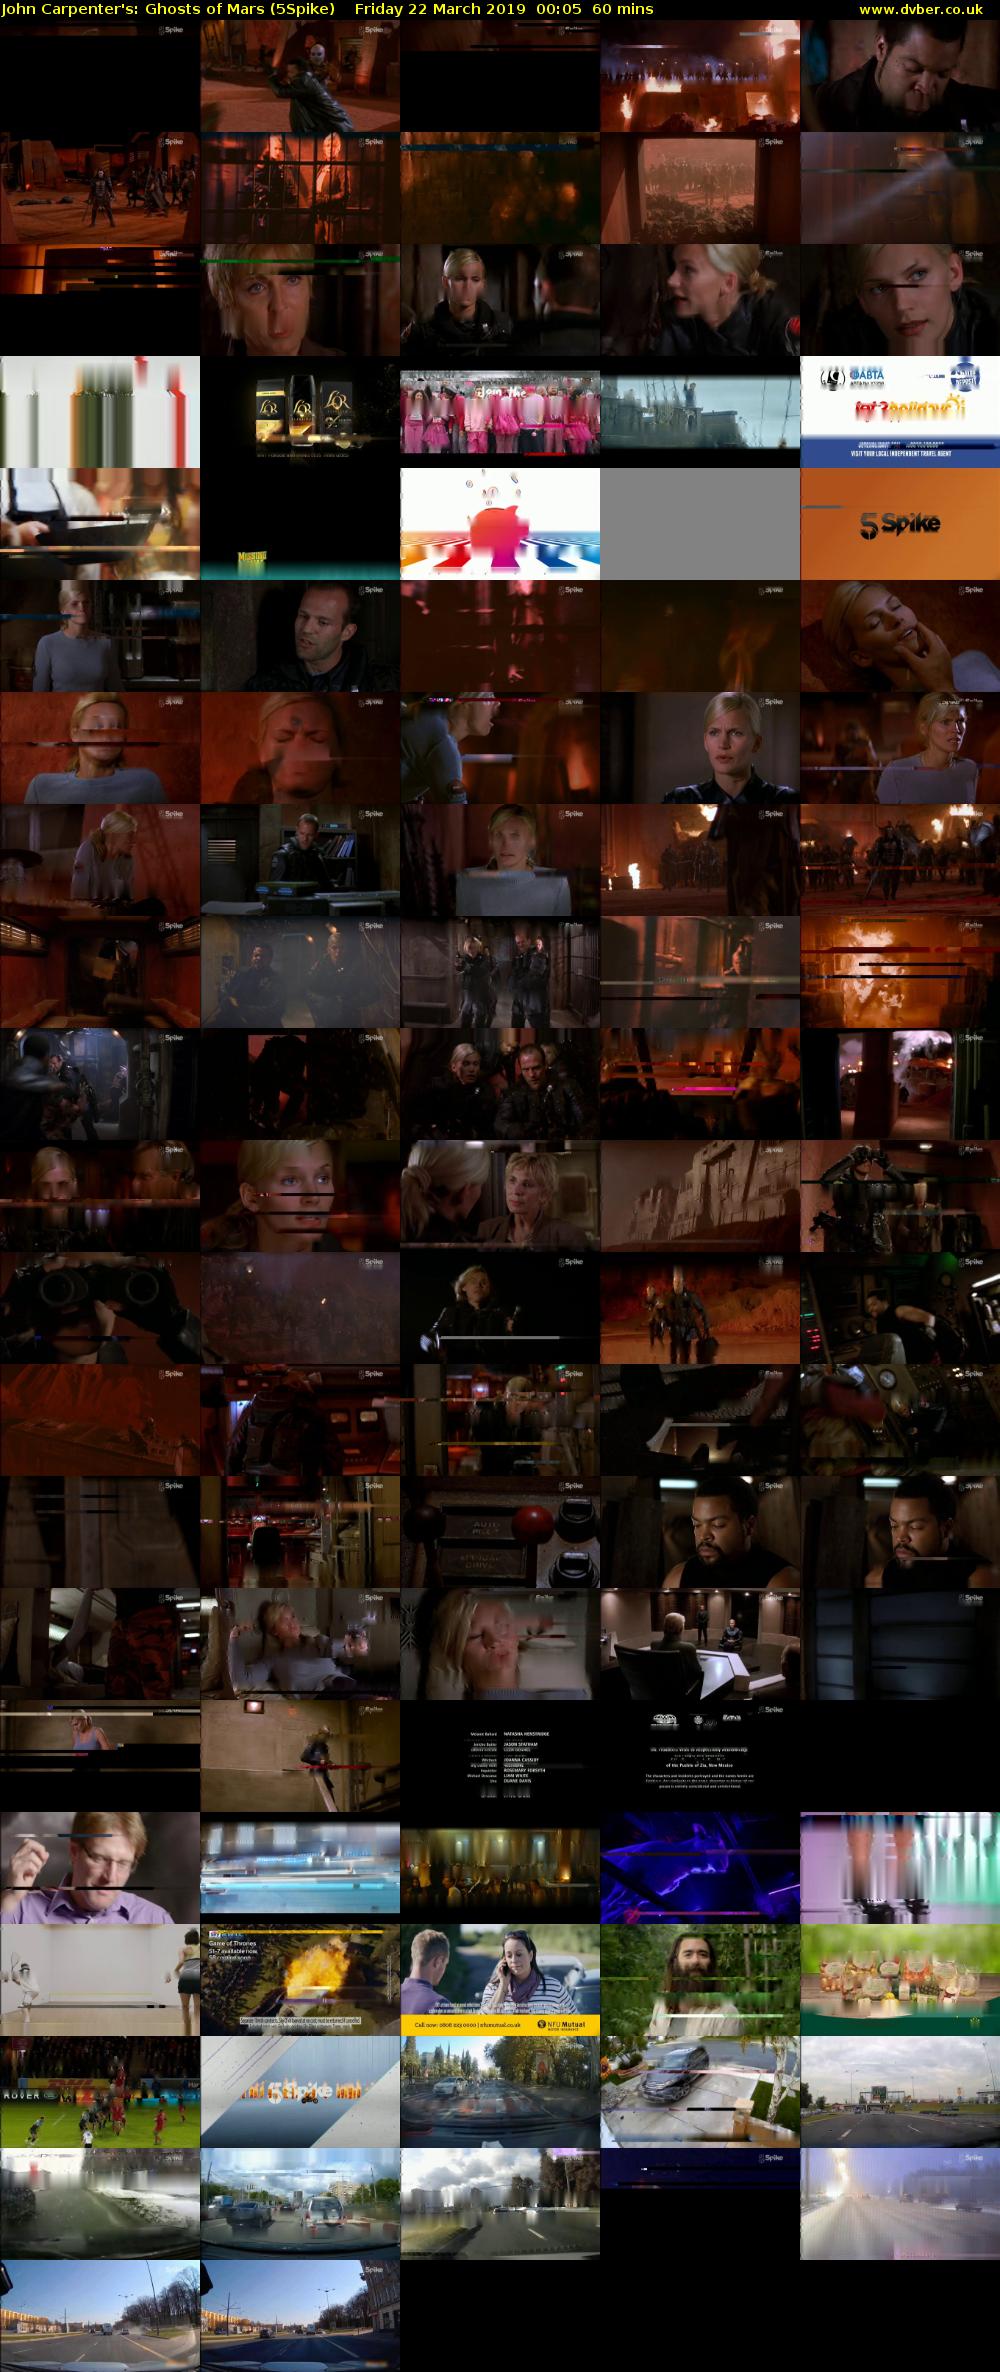 John Carpenter's: Ghosts of Mars (5Spike) Friday 22 March 2019 00:05 - 01:05